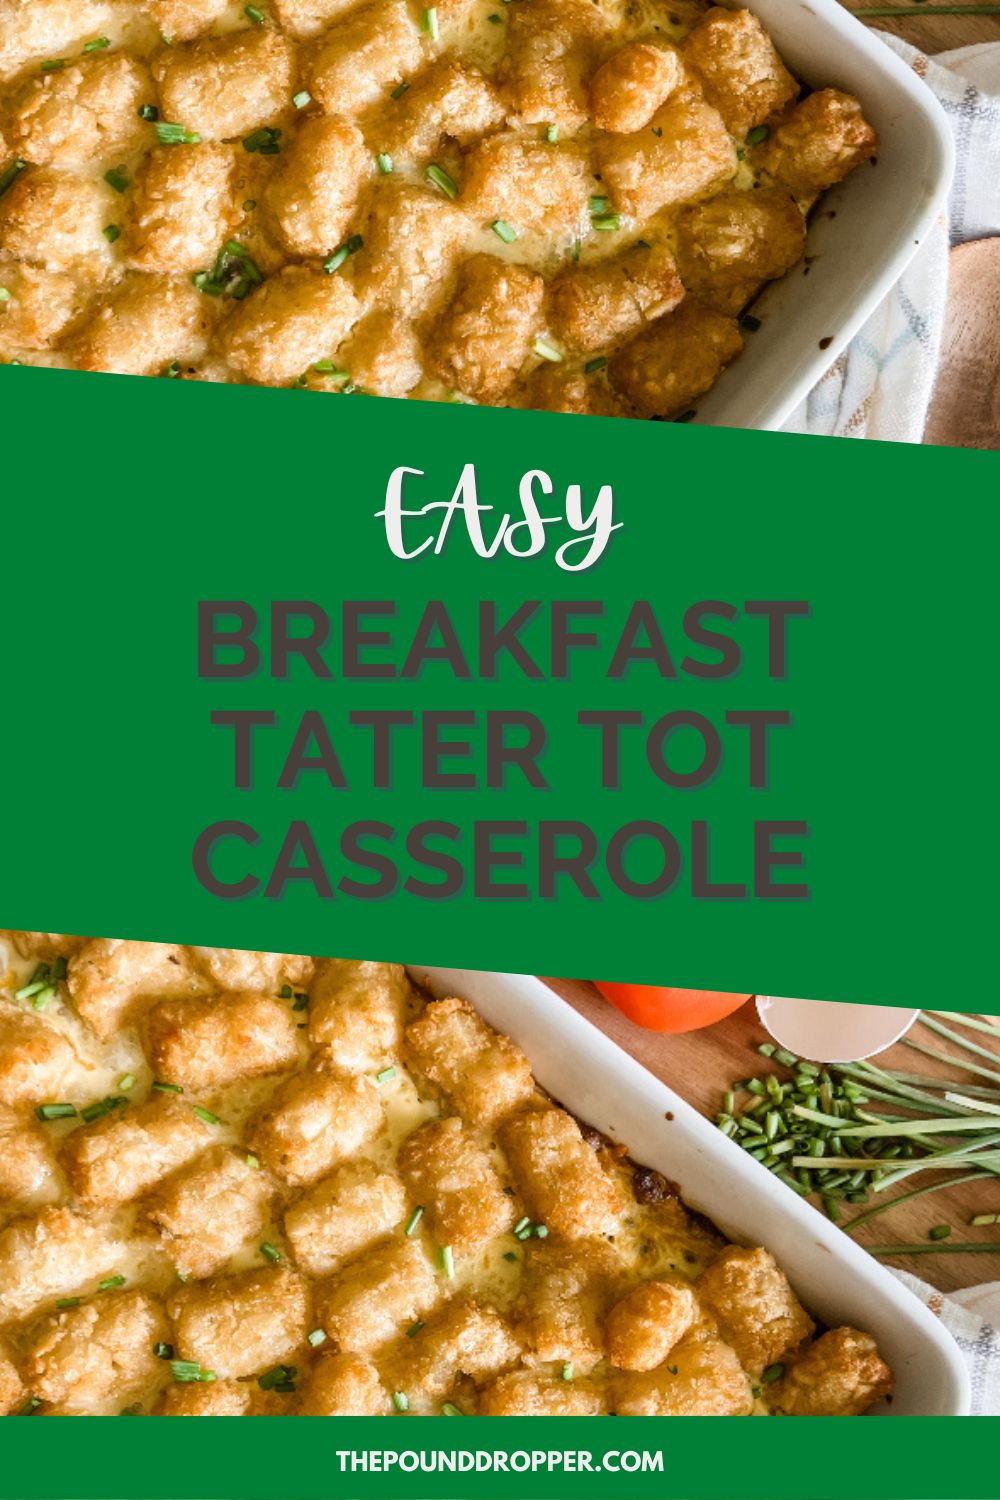 This Easy Breakfast Tater Tot Casserole is packed with eggs, onion, bell peppers, sausage, cheese, and topped with crispy tater tots. This makes for an awesome meal prep breakfast casserole and takes just a few minutes to throw together. It's filling, hearty, and great way to start your morning!! via @pounddropper